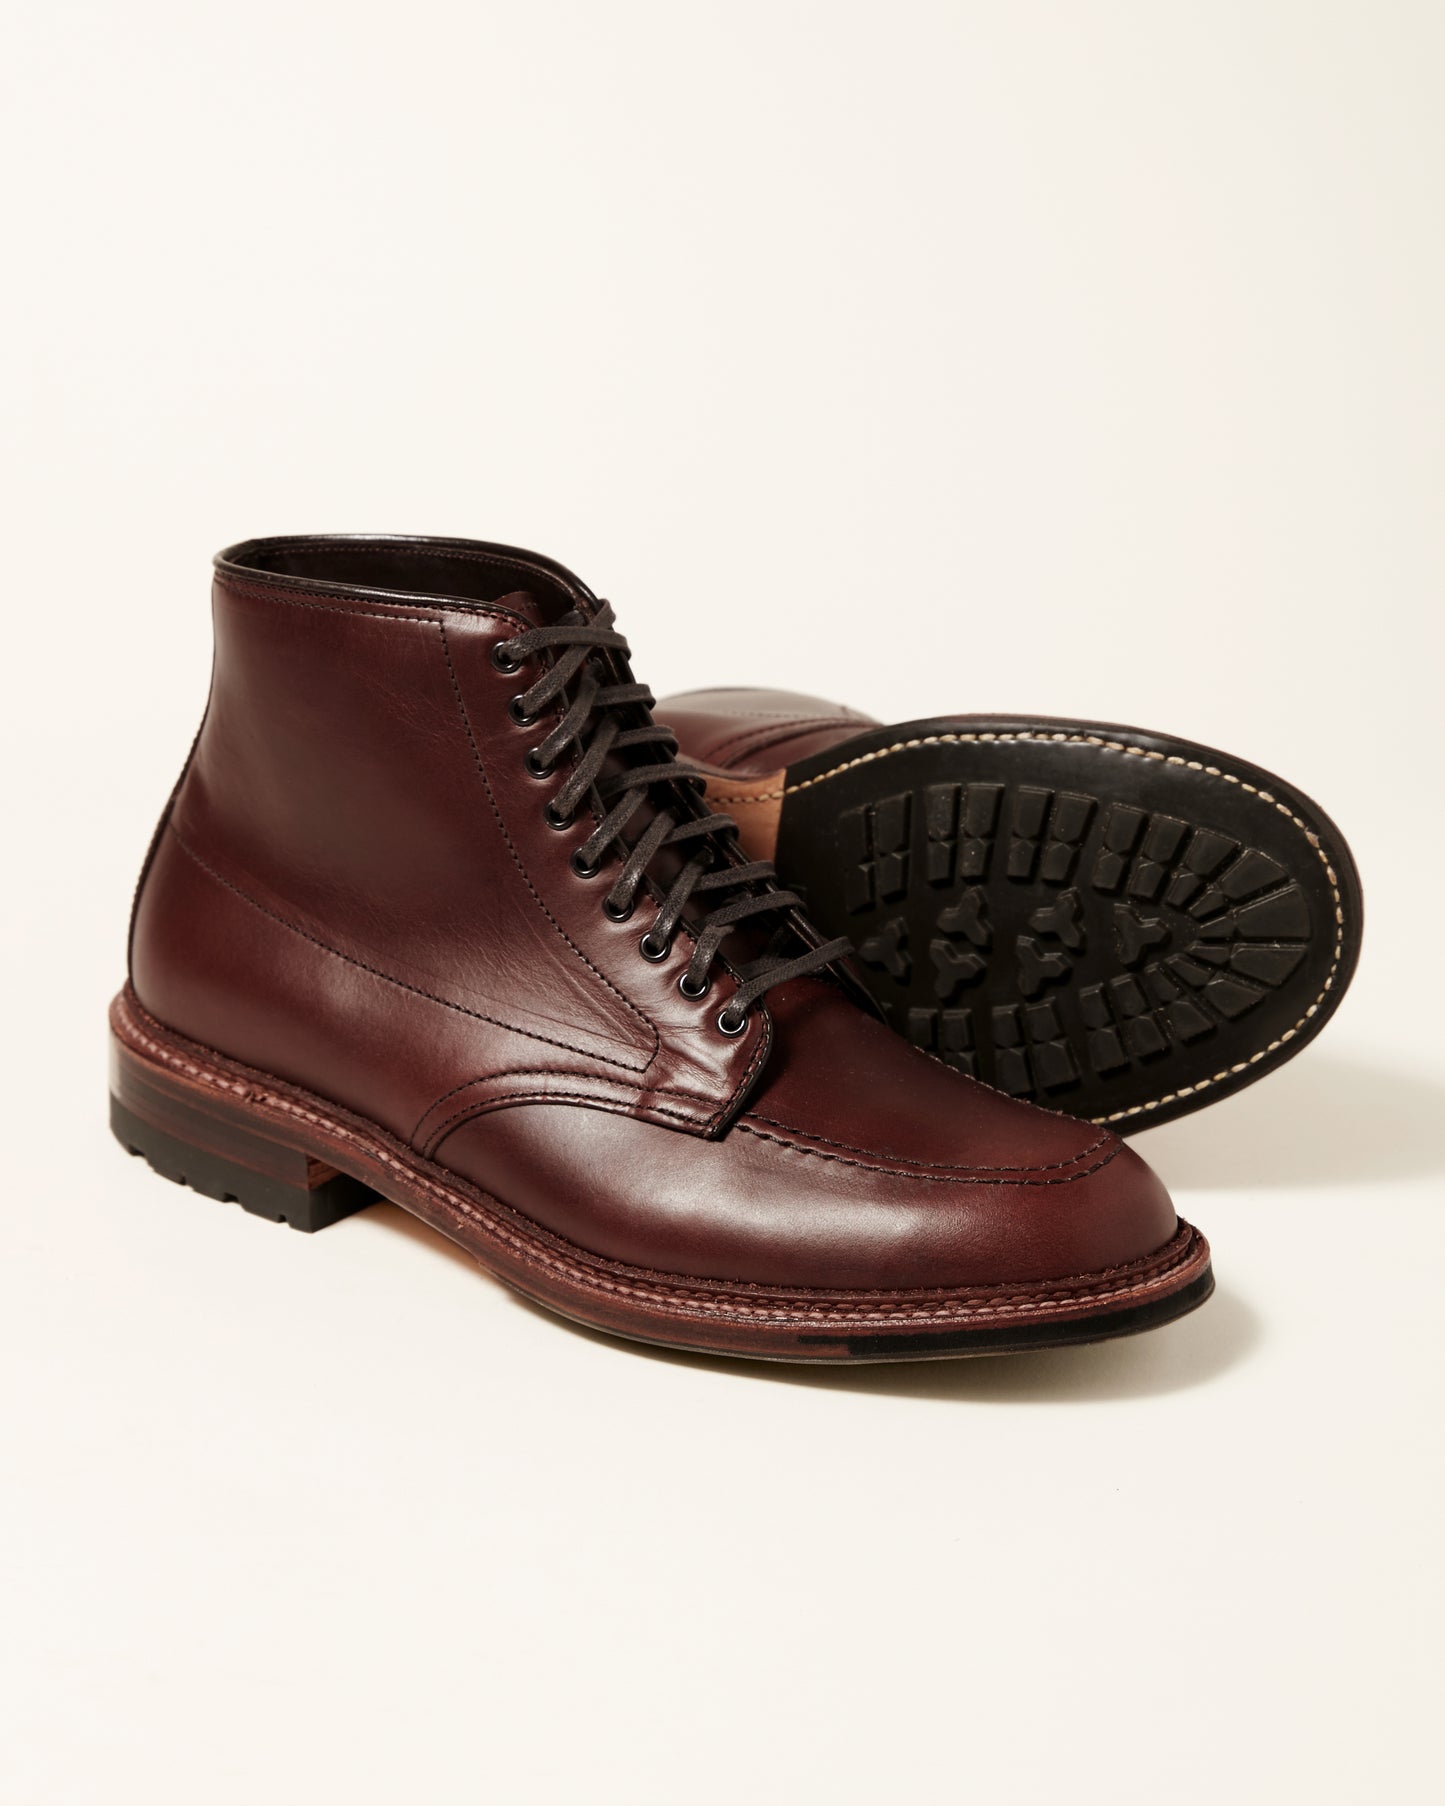 "PAC" Brown Chromexcel Indy Boot